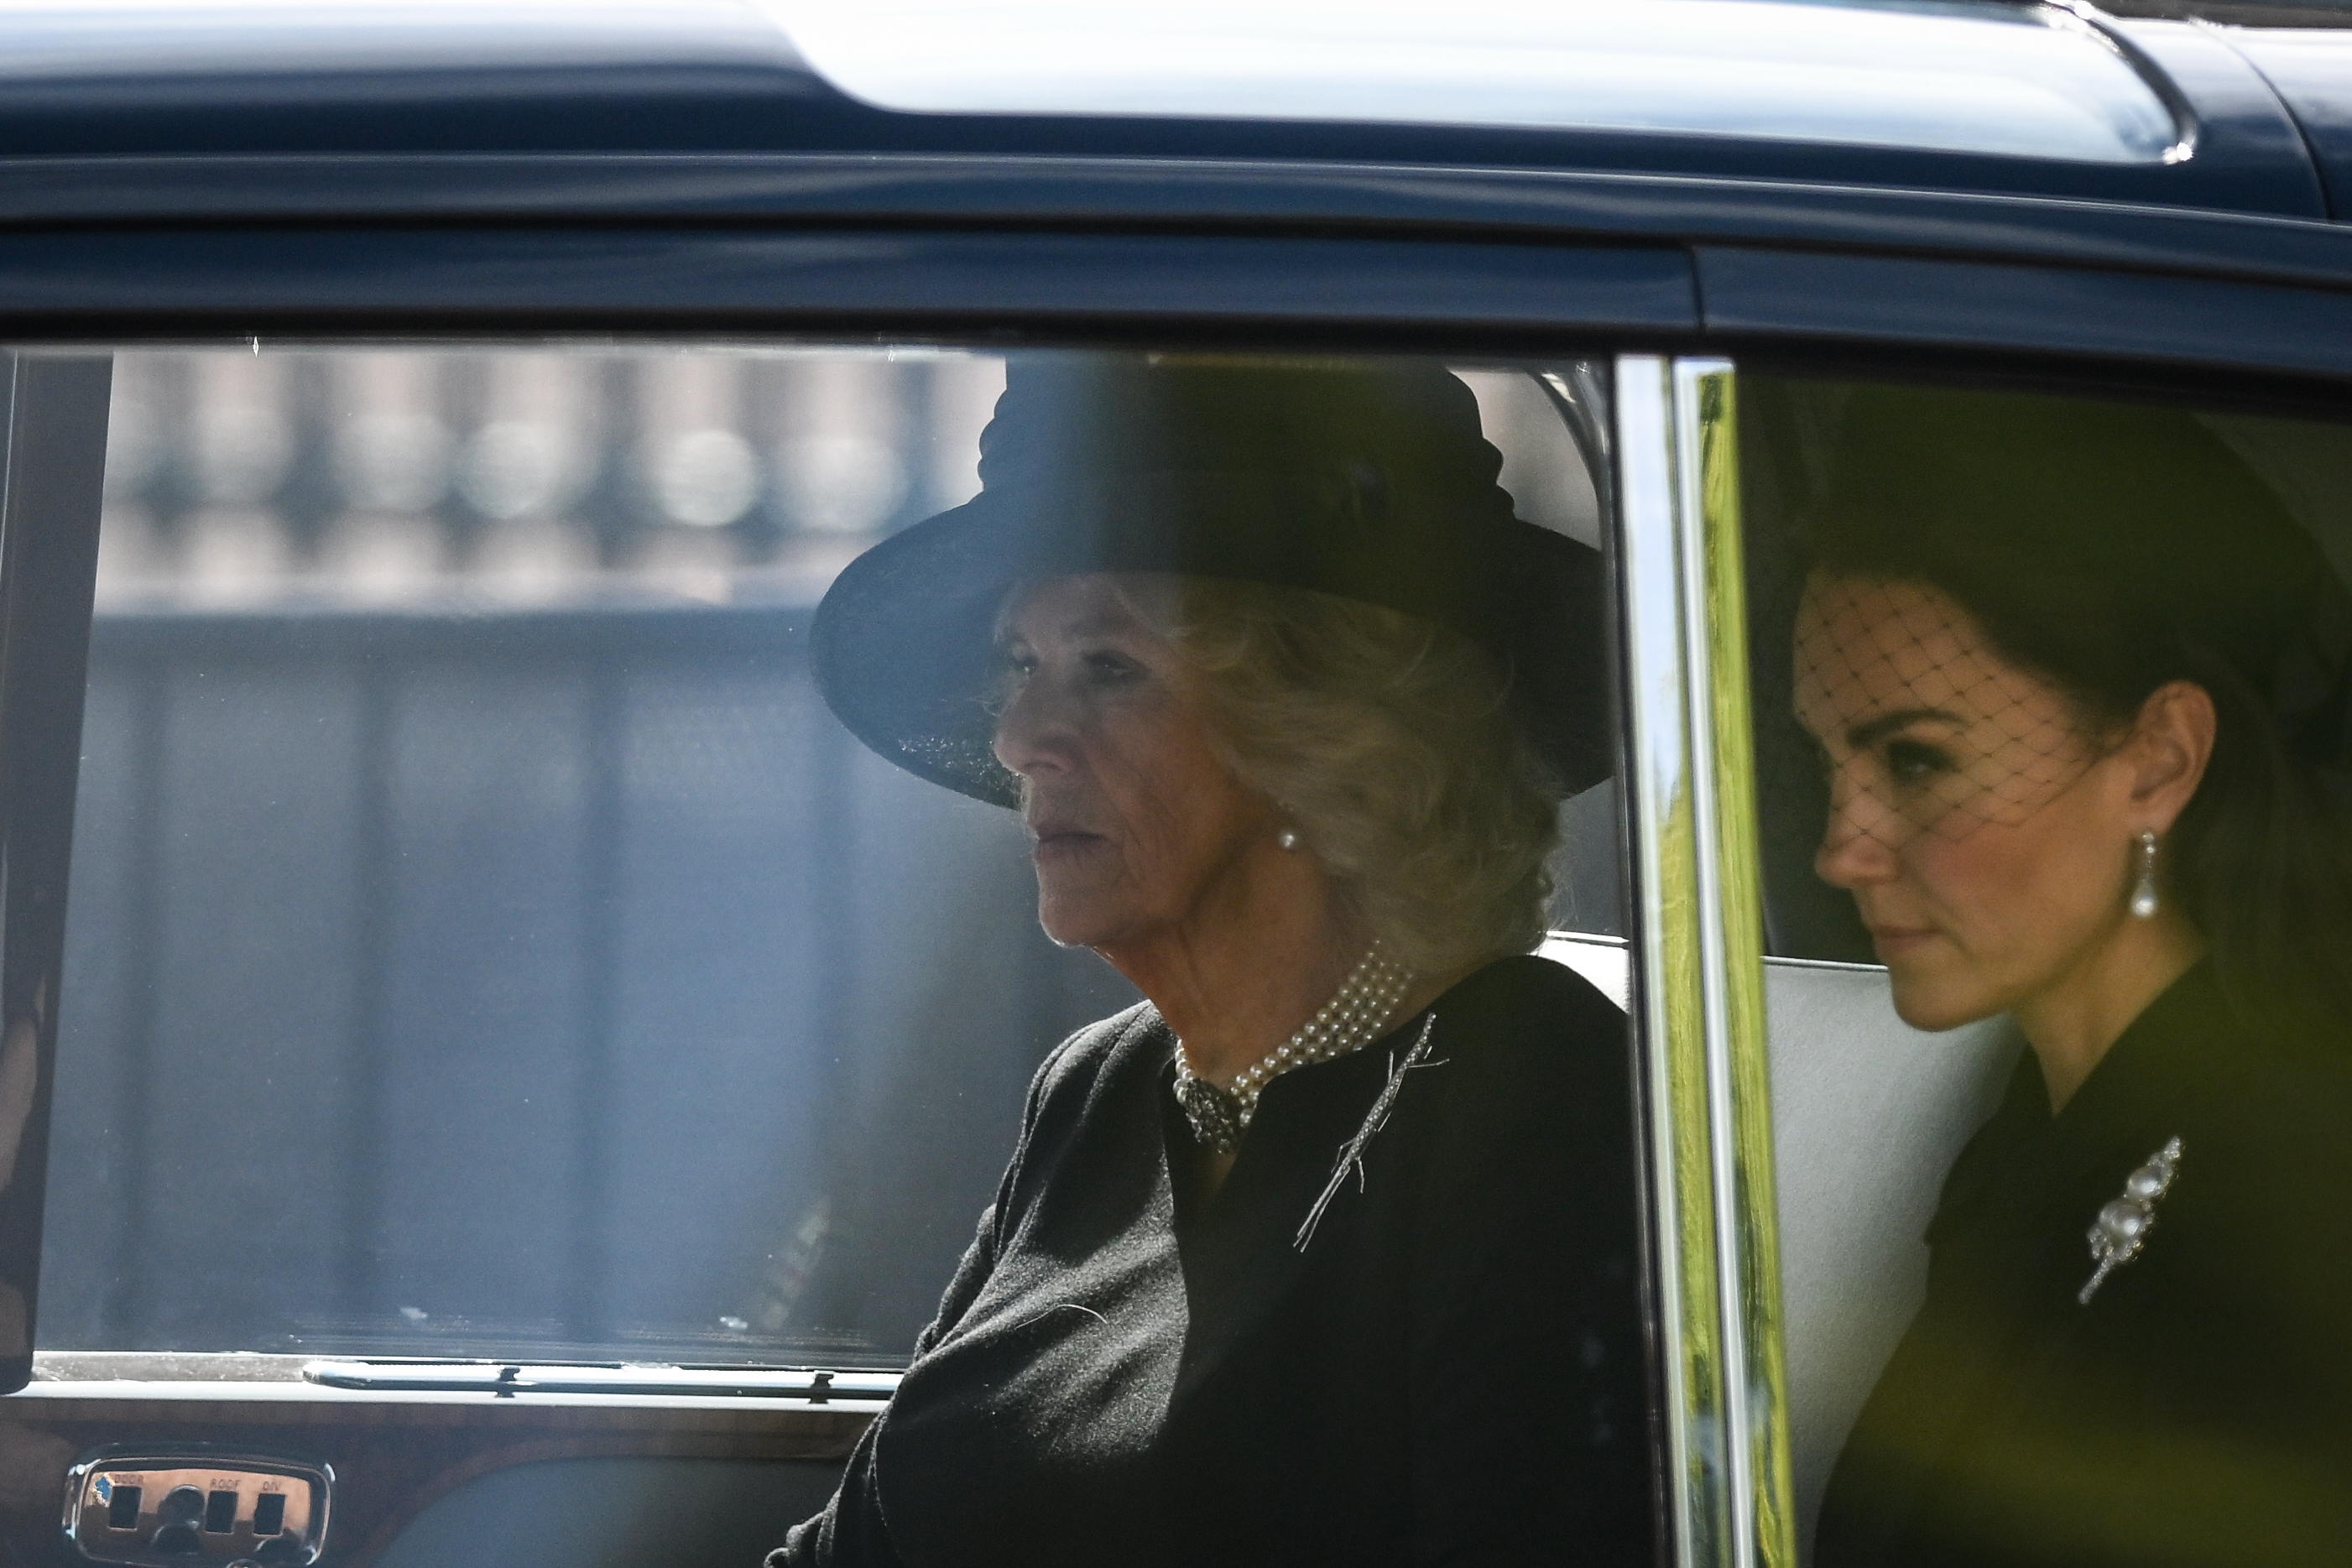 <p>Camilla, Queen Consort and Princess Kate departed Buckingham Palace in a car together to follow the coffin of Queen Elizabeth II, adorned with a royal standard and the Imperial State Crown, as it was pulled by a gun carriage of the King's Troop Royal Horse Artillery during a procession to Westminster Hall on Sept. 14, 2022, for the late monarch's lying in state.</p>